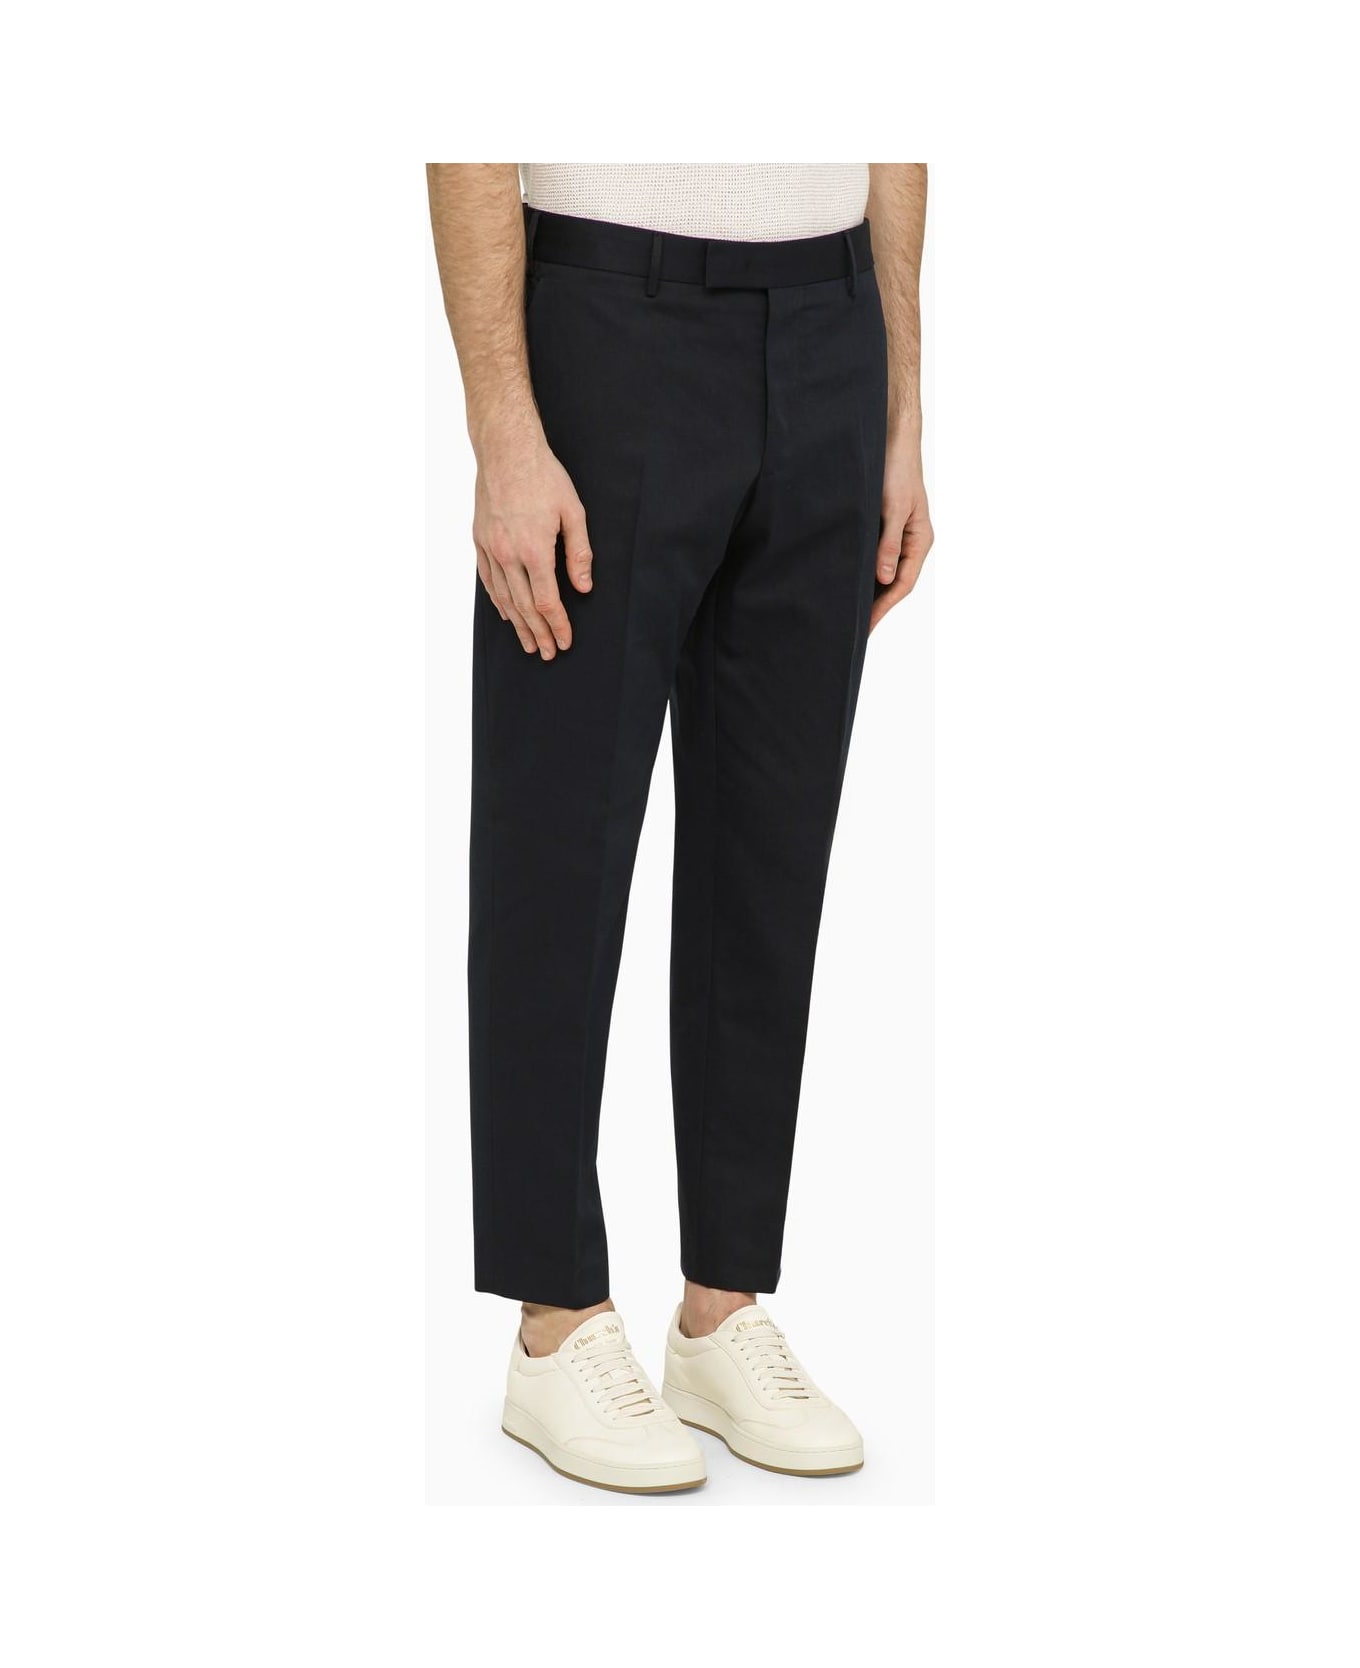 PT01 Navy Blue Slim Trousers In Cotton And Linen - 0360 BLUE